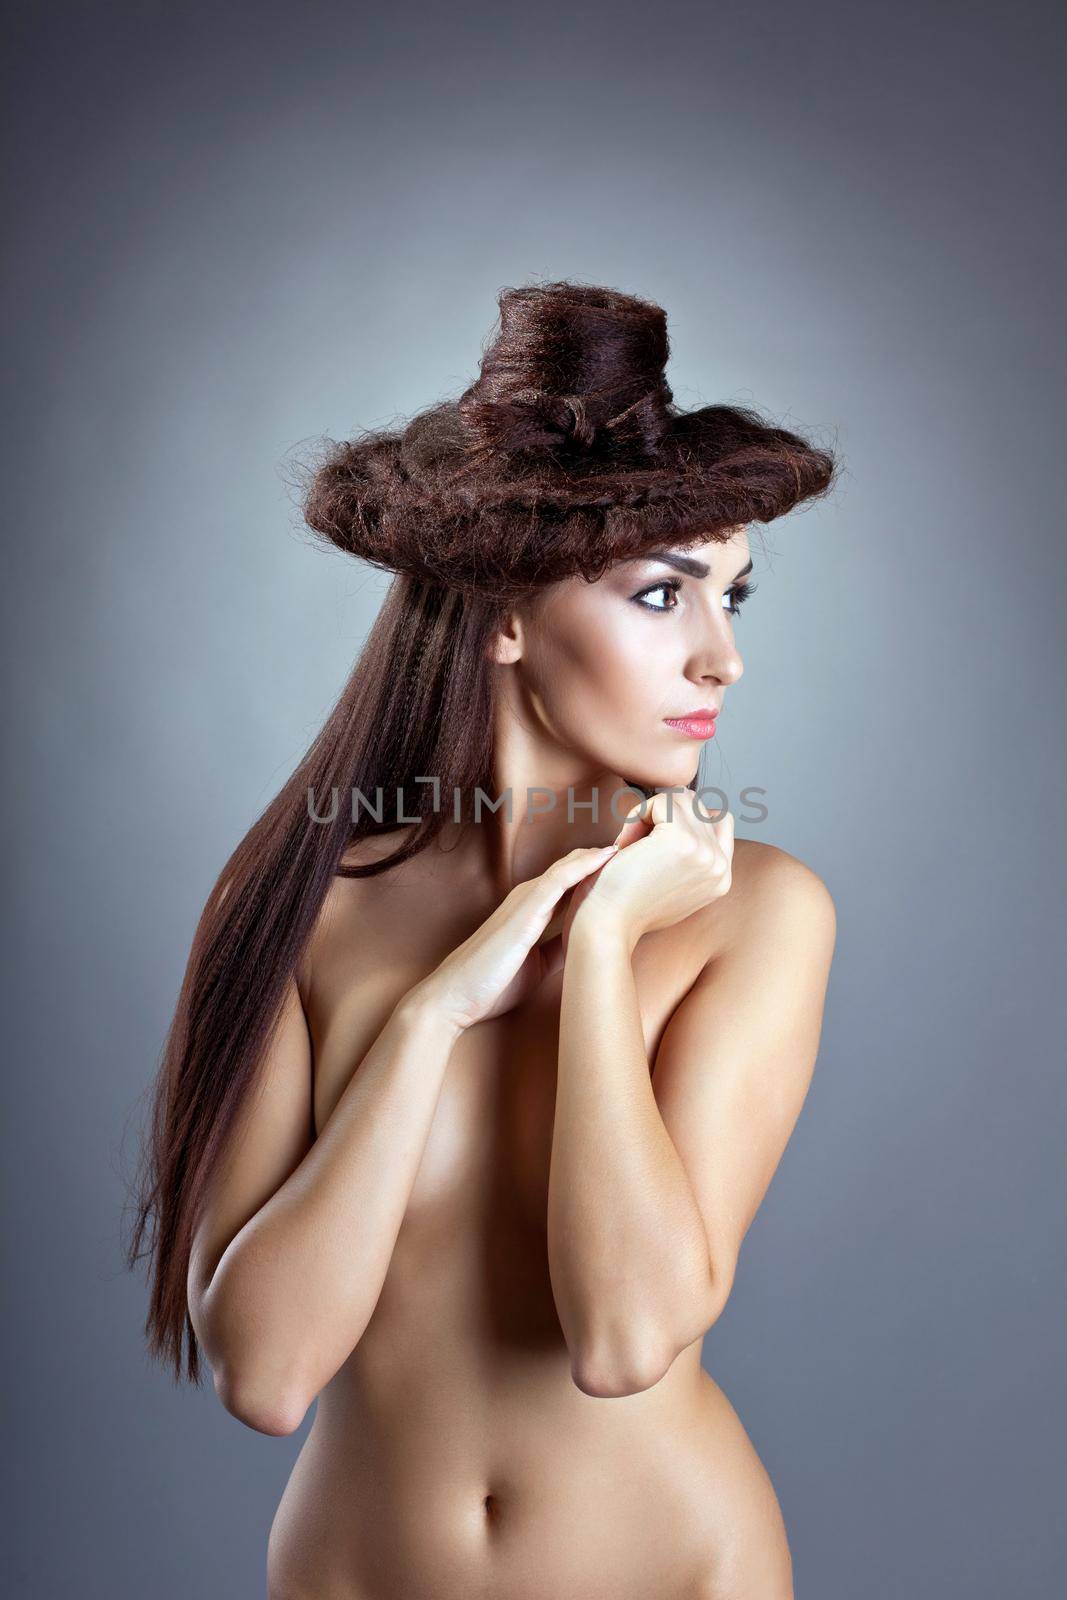 Bare woman with hair style close breast look aside by rivertime